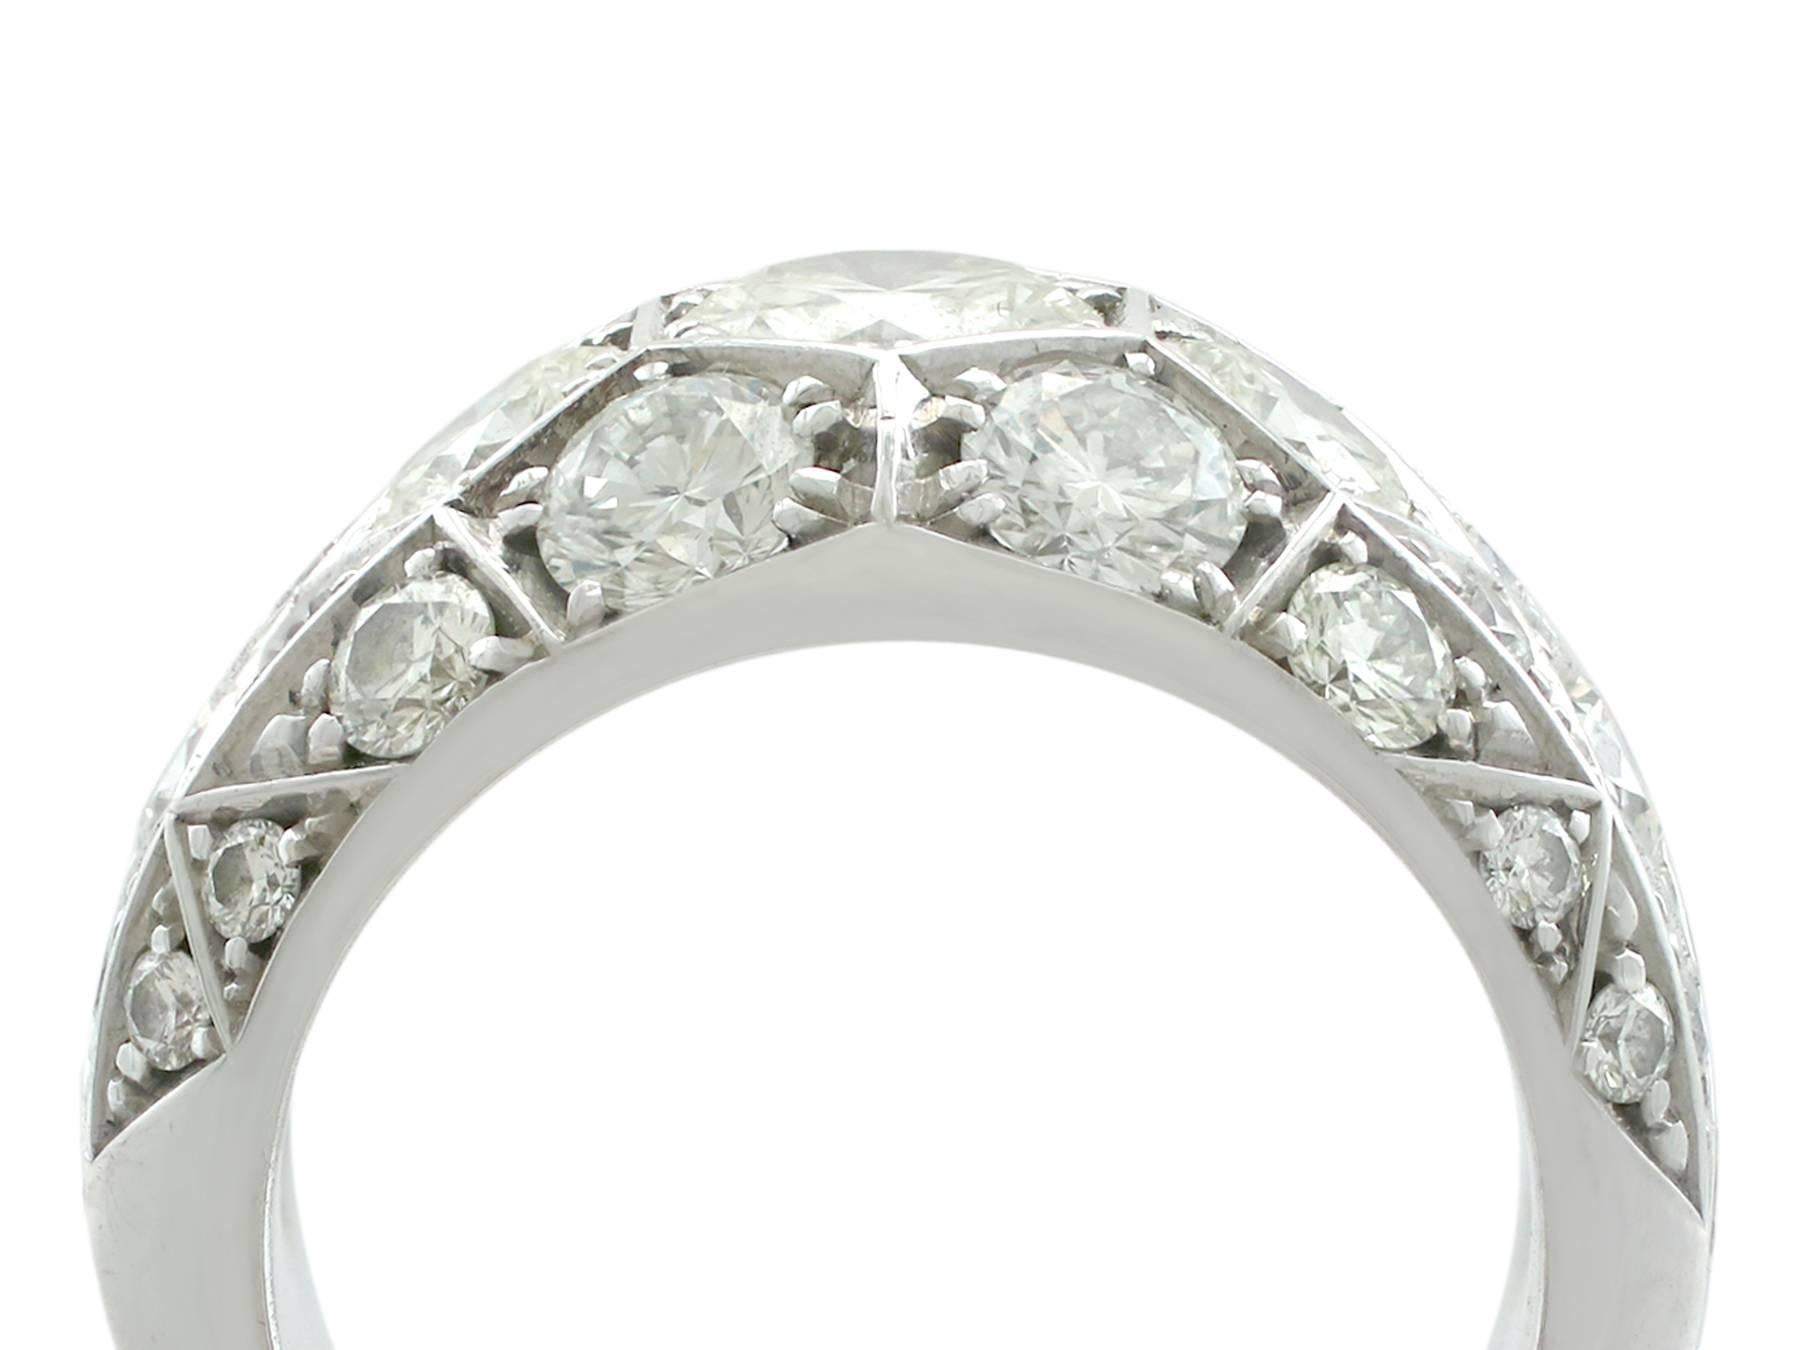 An exceptional, fine and impressive vintage white gold diamond dress ring; an addition to our diverse range of diamond jewelry

This exceptional vintage diamond dress ring has been crafted in 18 karat white gold.

The impressive domed geometric